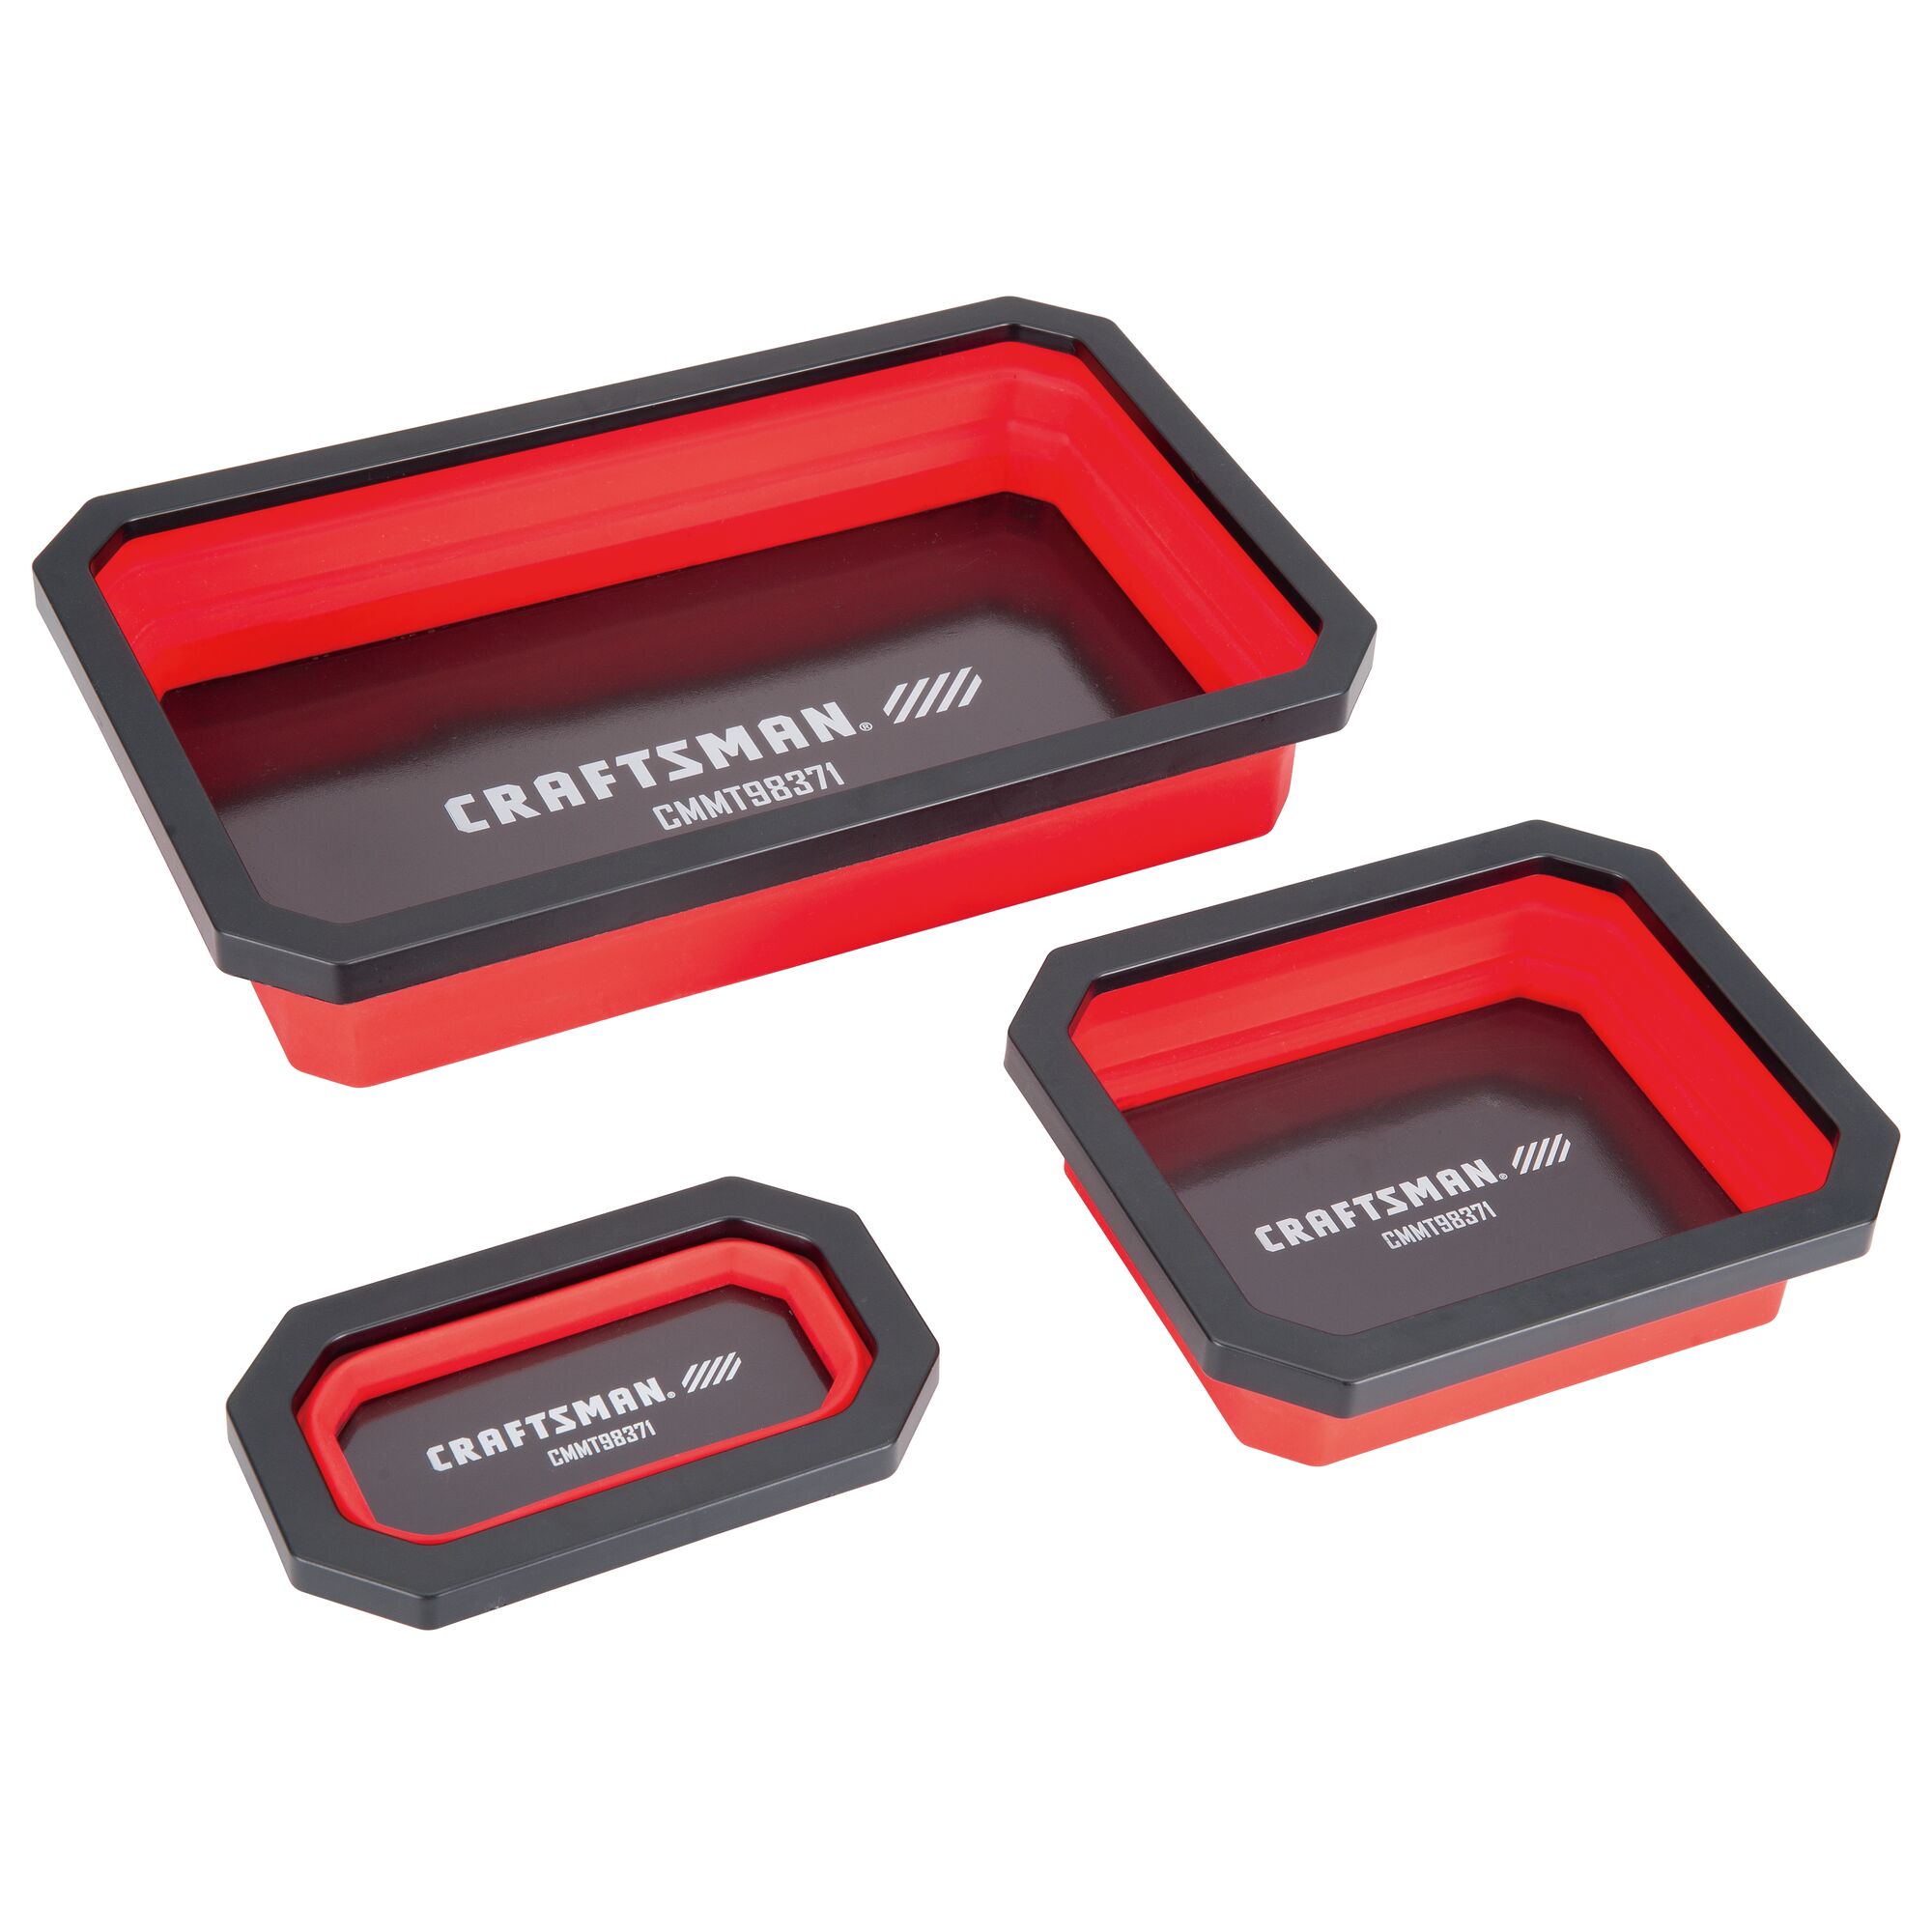 CRAFTSMAN Automotive Magnetic Tray in the Automotive Hand Tools